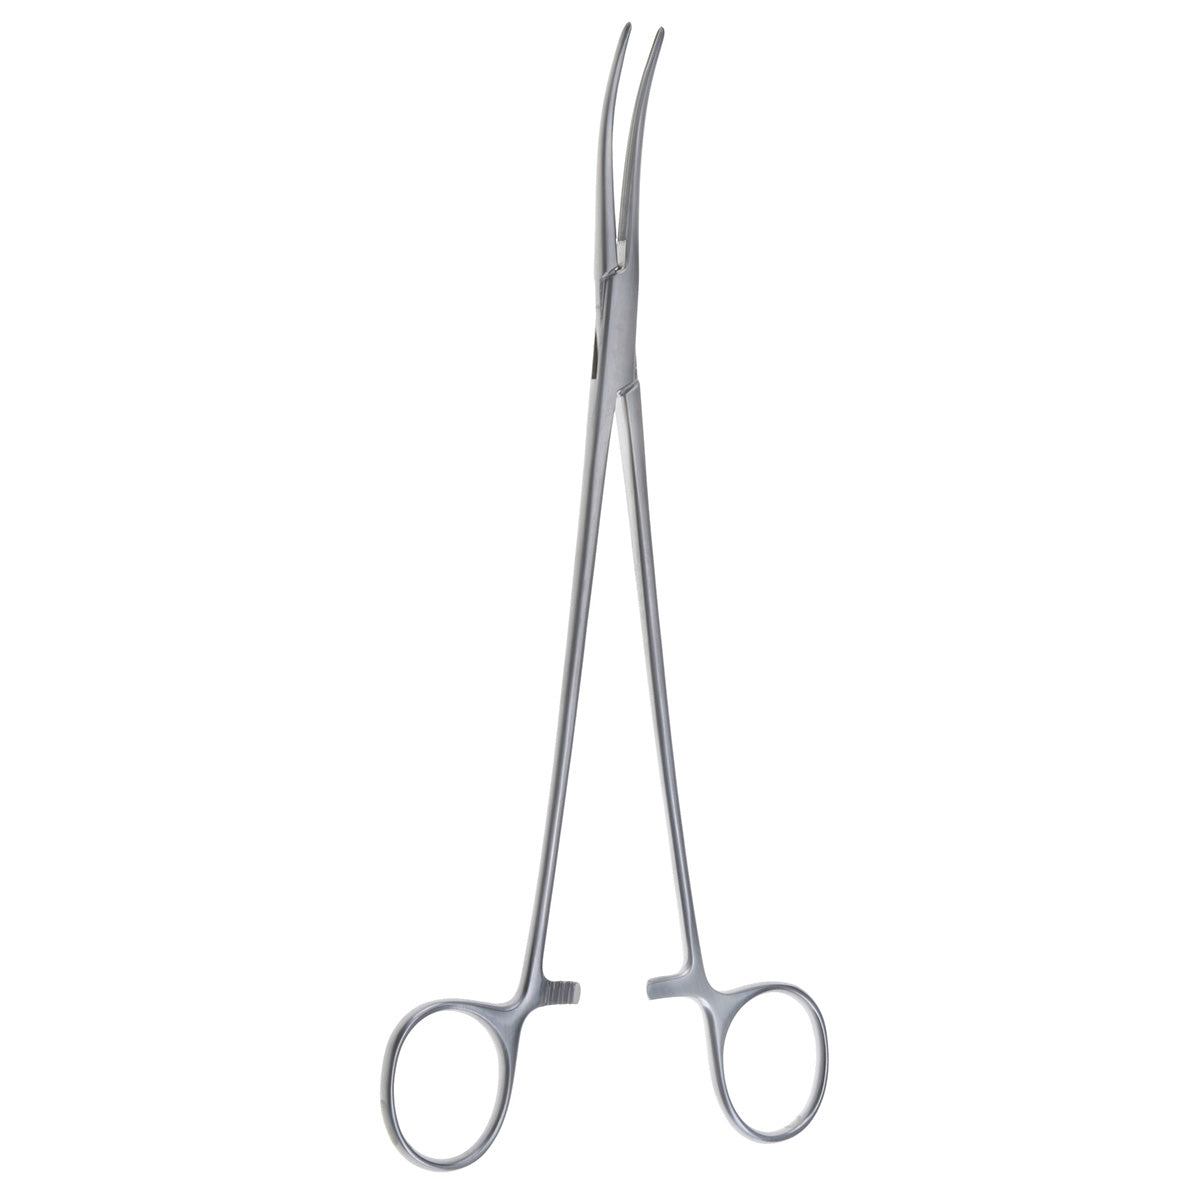 curved Debakey-Cooley forceps